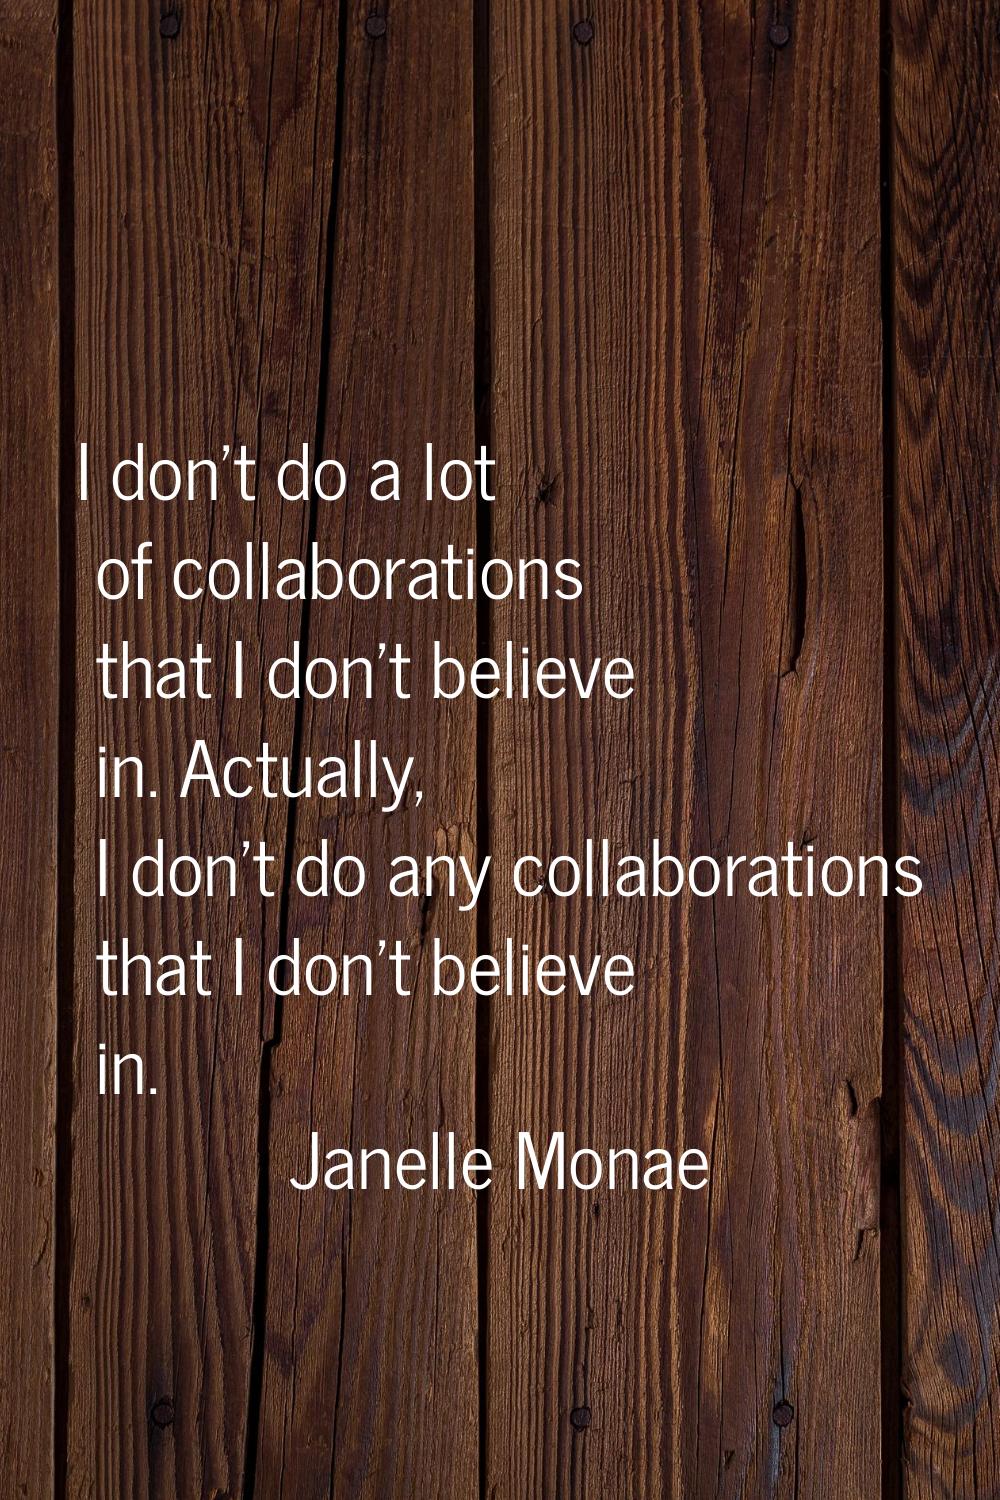 I don't do a lot of collaborations that I don't believe in. Actually, I don't do any collaborations